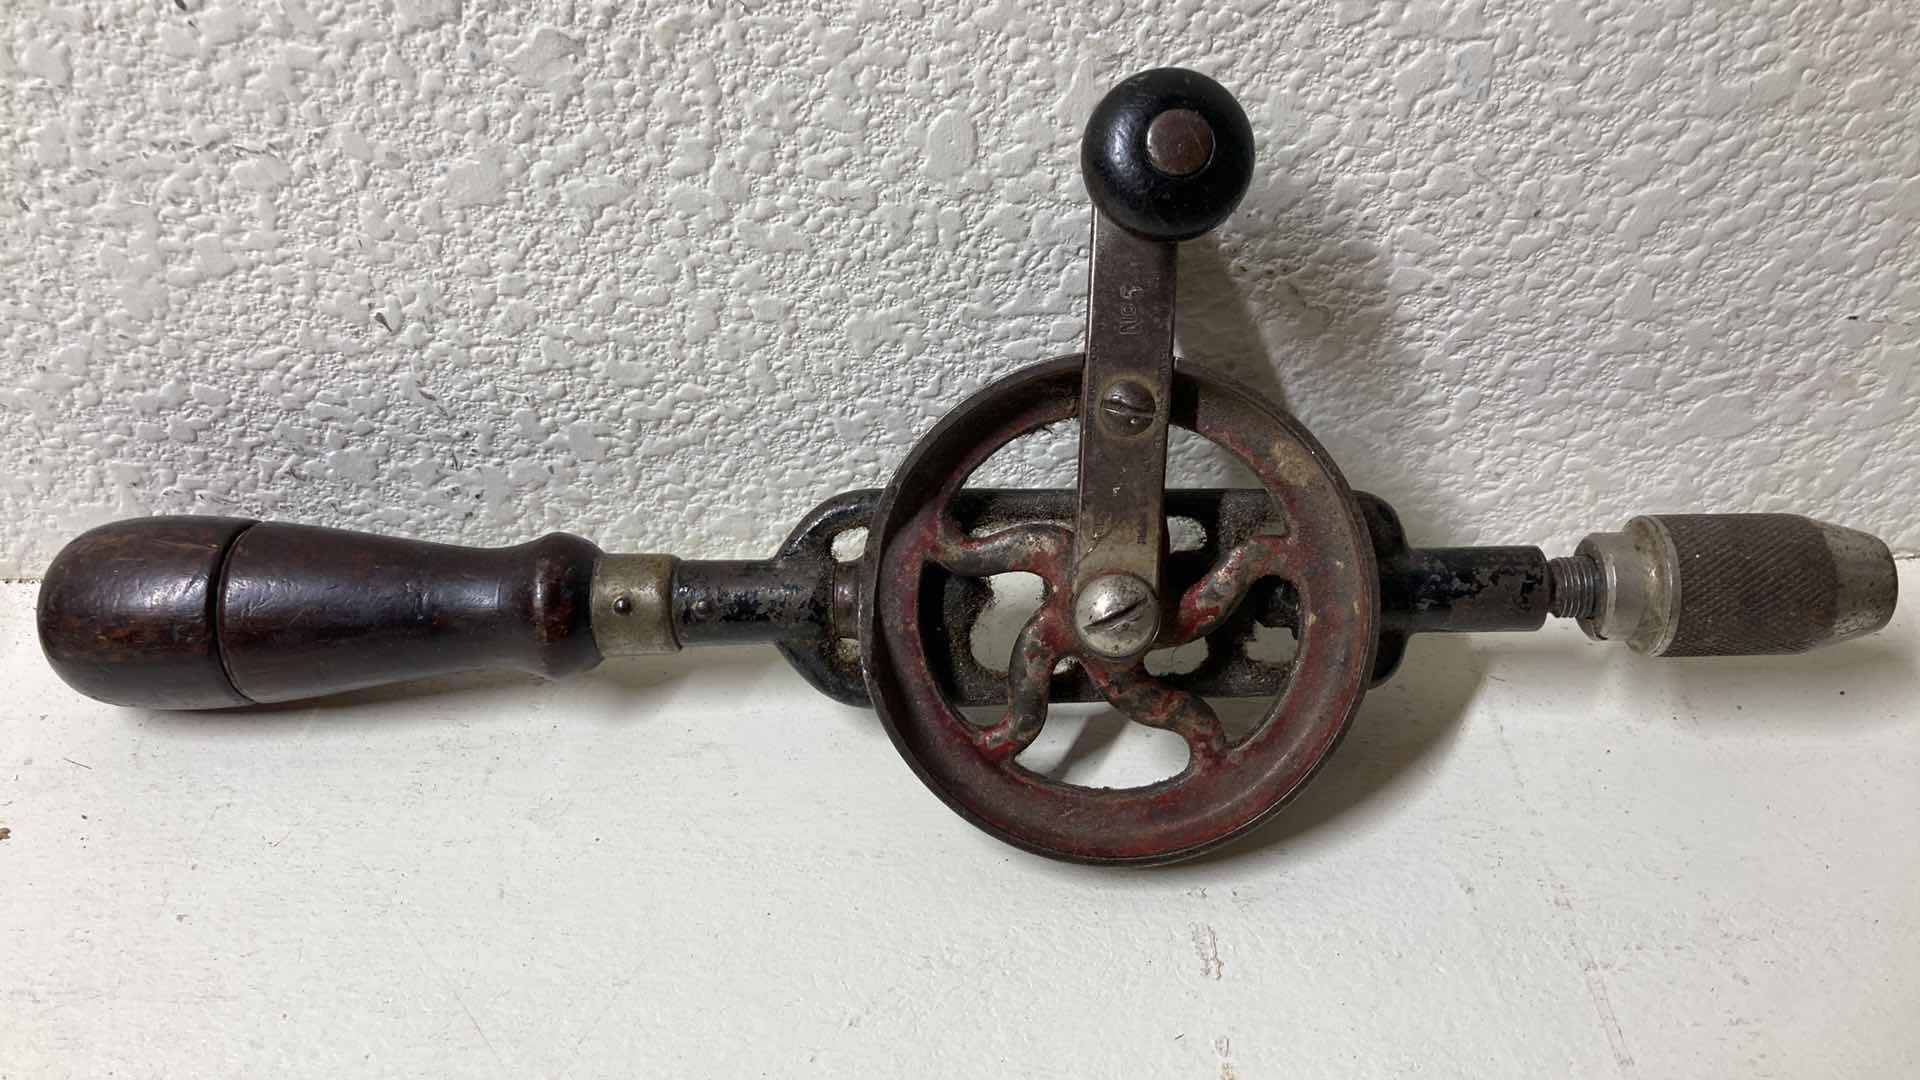 Photo 5 of P & B DRILL & MILLERS FALL CRANK DRILL W VINTAGE HAND SAW